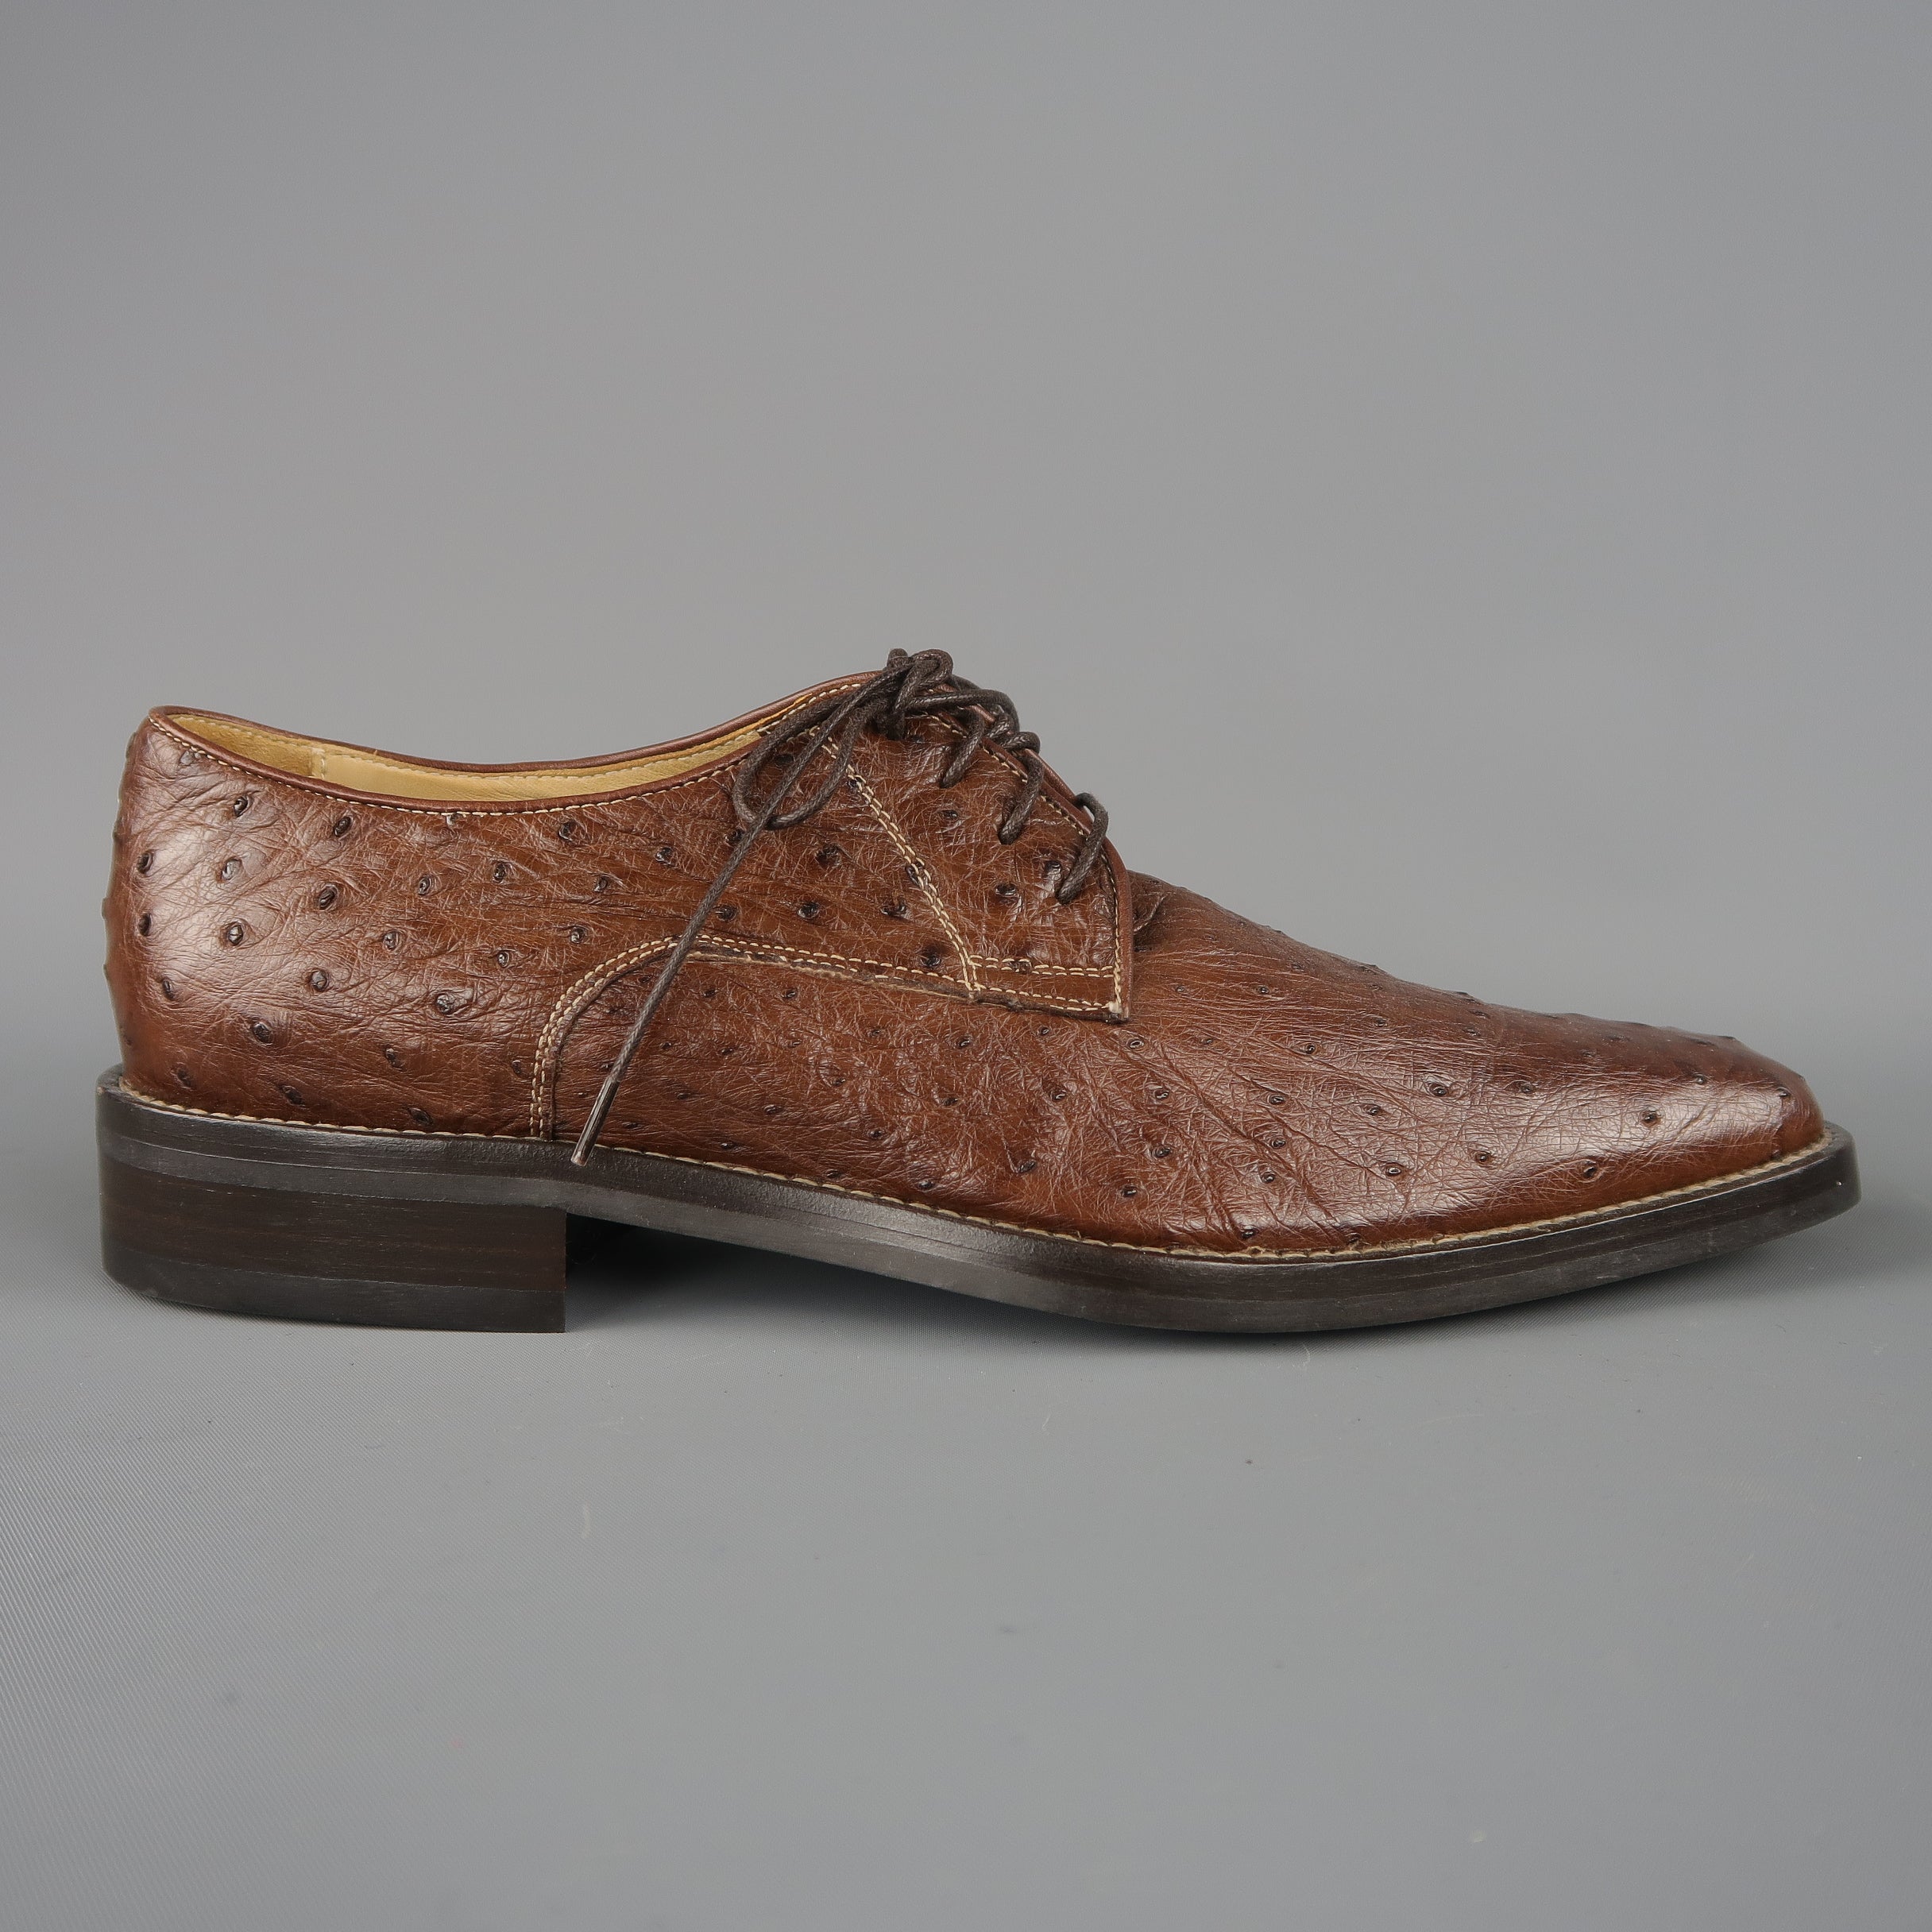 Cole Haan Brown Leather Oxford Lace Up Dress Shoes - Shoes